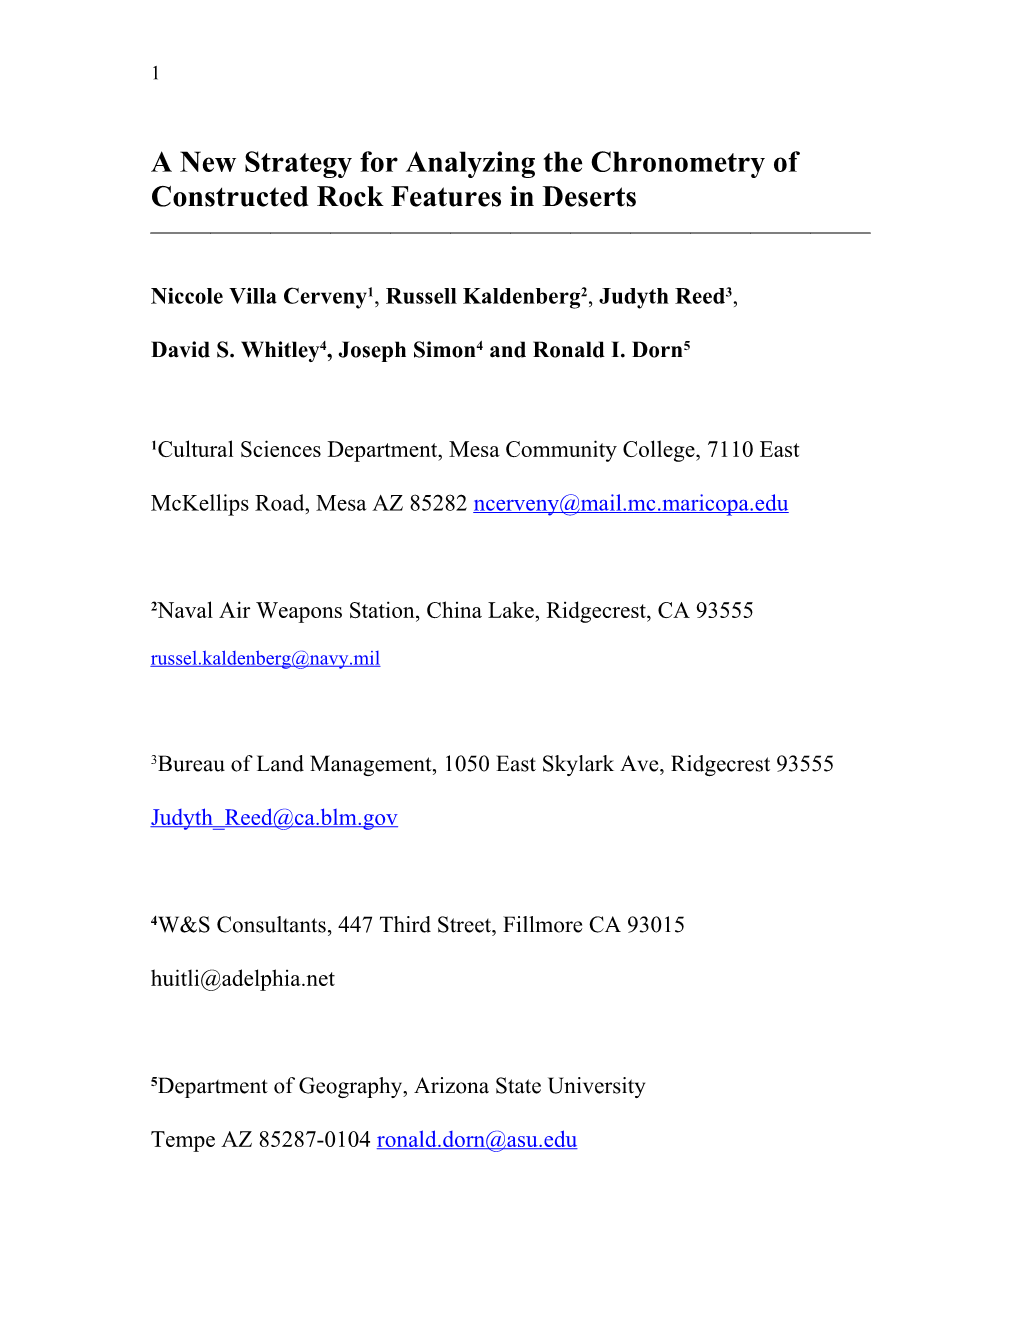 A New Strategy for Analyzing the Chronometry of Constructed Rock Features in Deserts